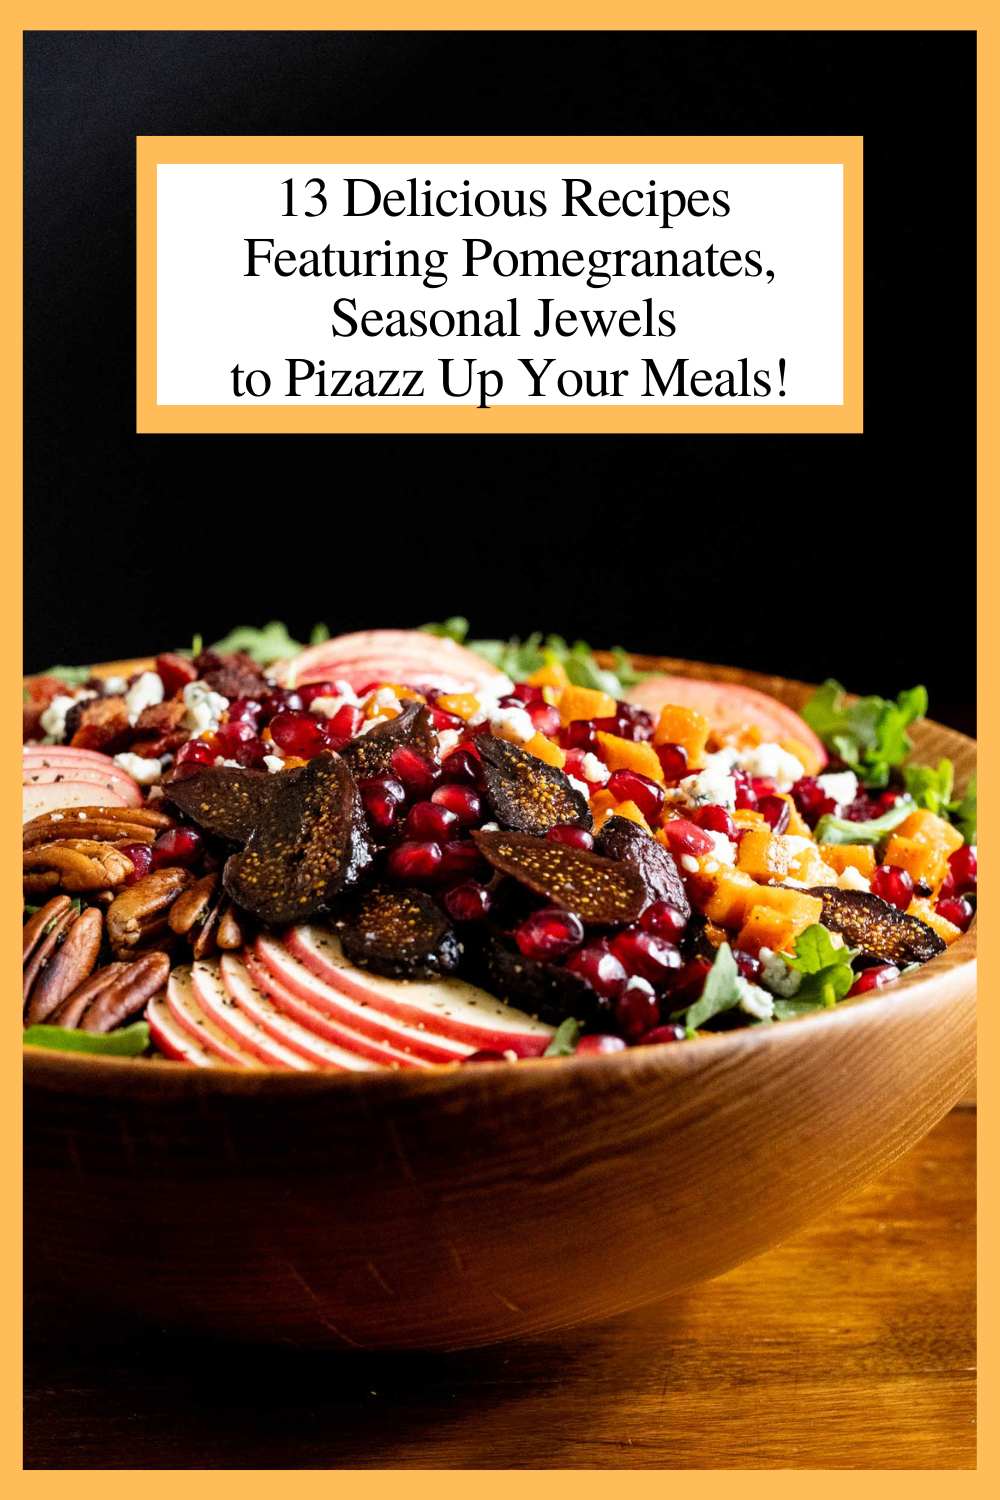 13 Delicious Pomegrante Recipes, Seasonal Jewels to Brighten Your Holiday Meals